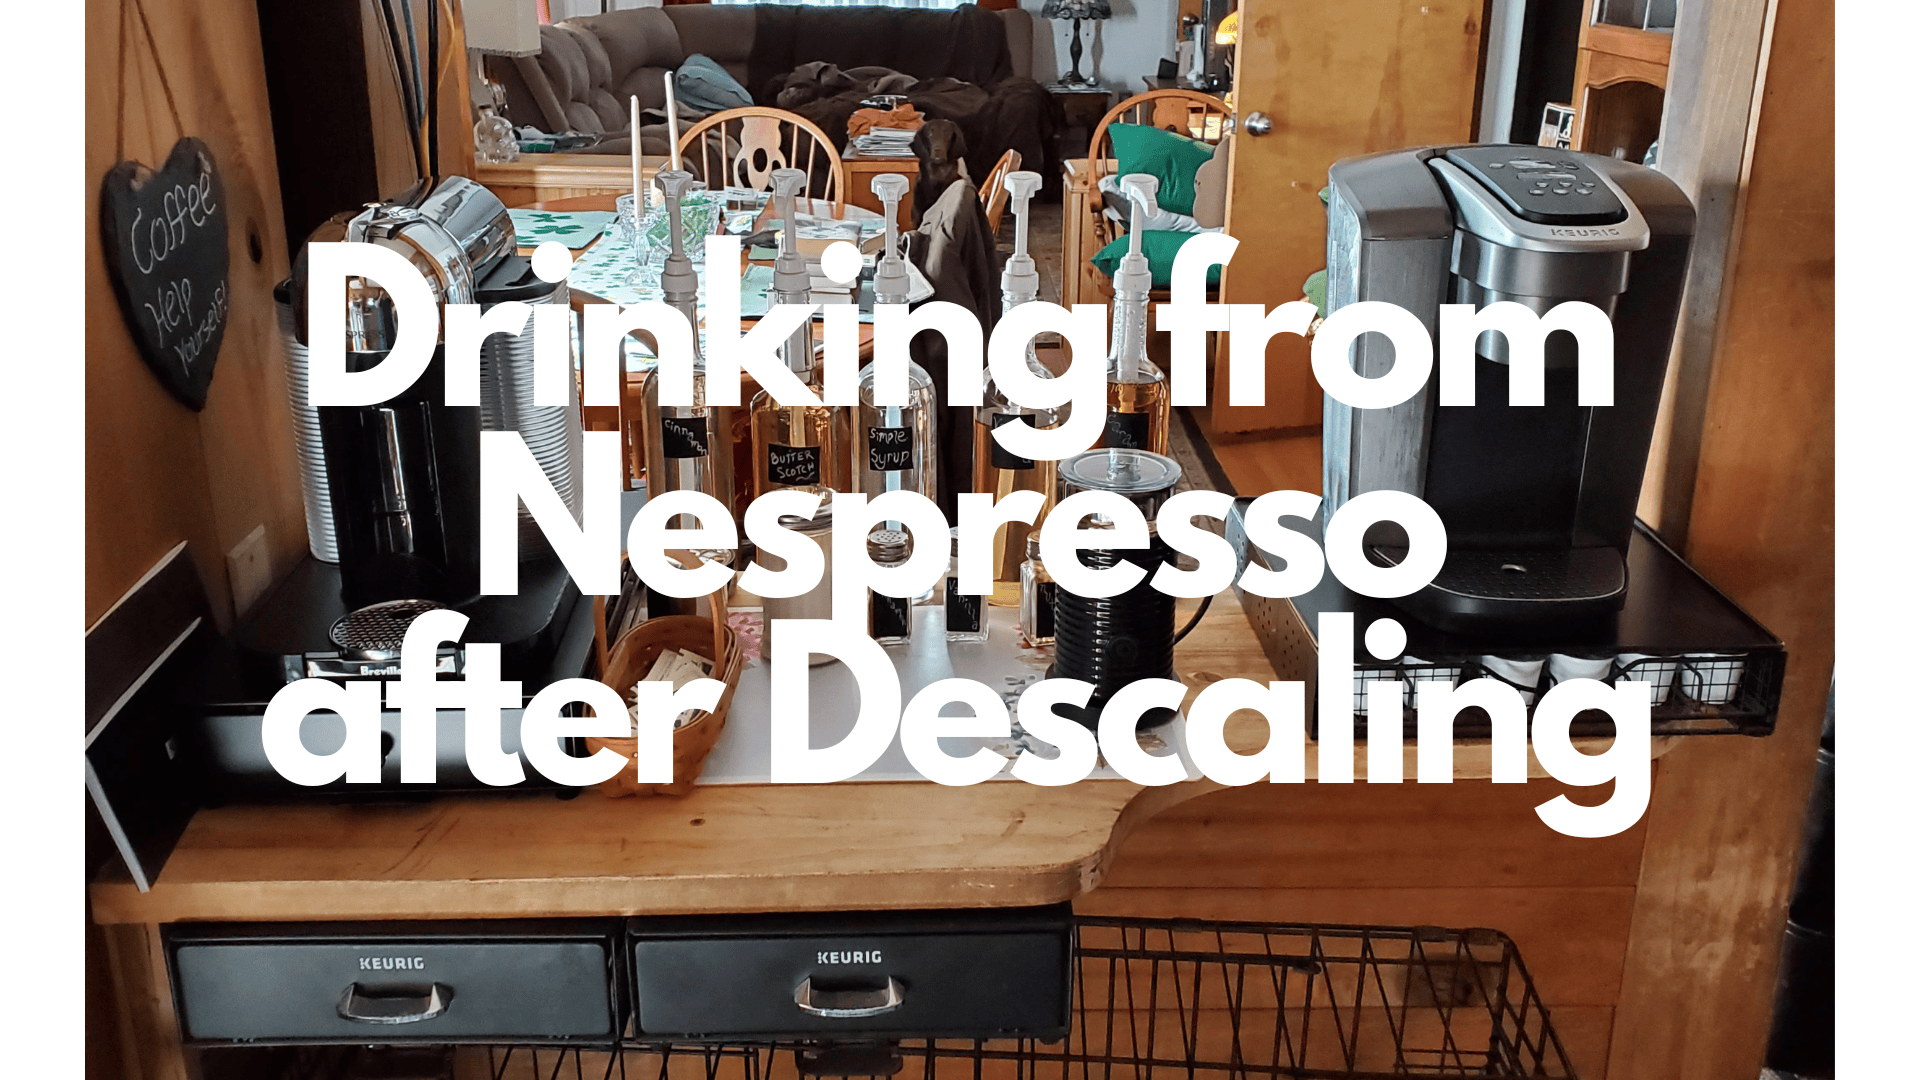 Is It Safe to Drink From Nespresso After Descaling?